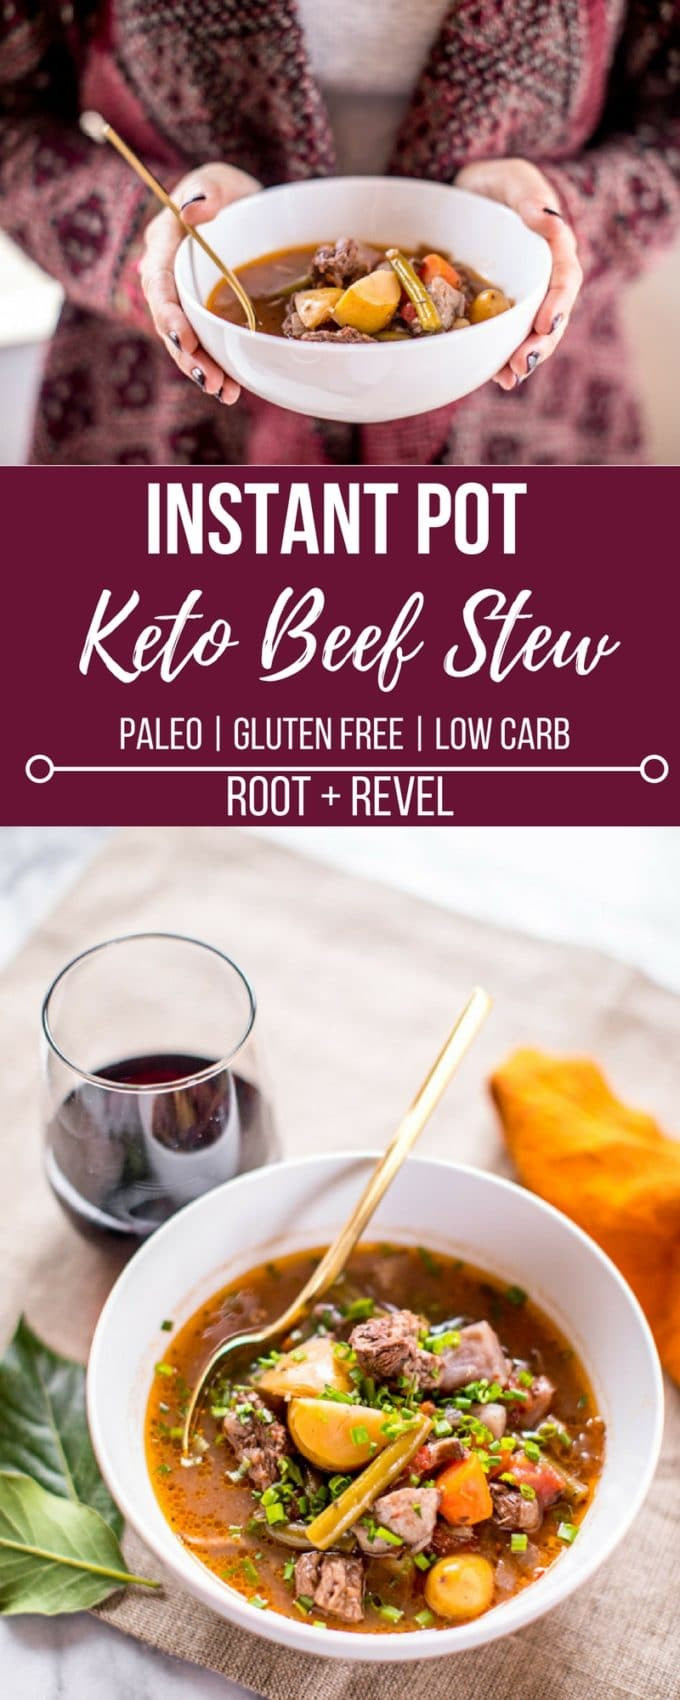 Beef Stew Meat Recipes Instant Pot Keto
 Keto Beef Stew in the Instant Pot or Slow Cooker